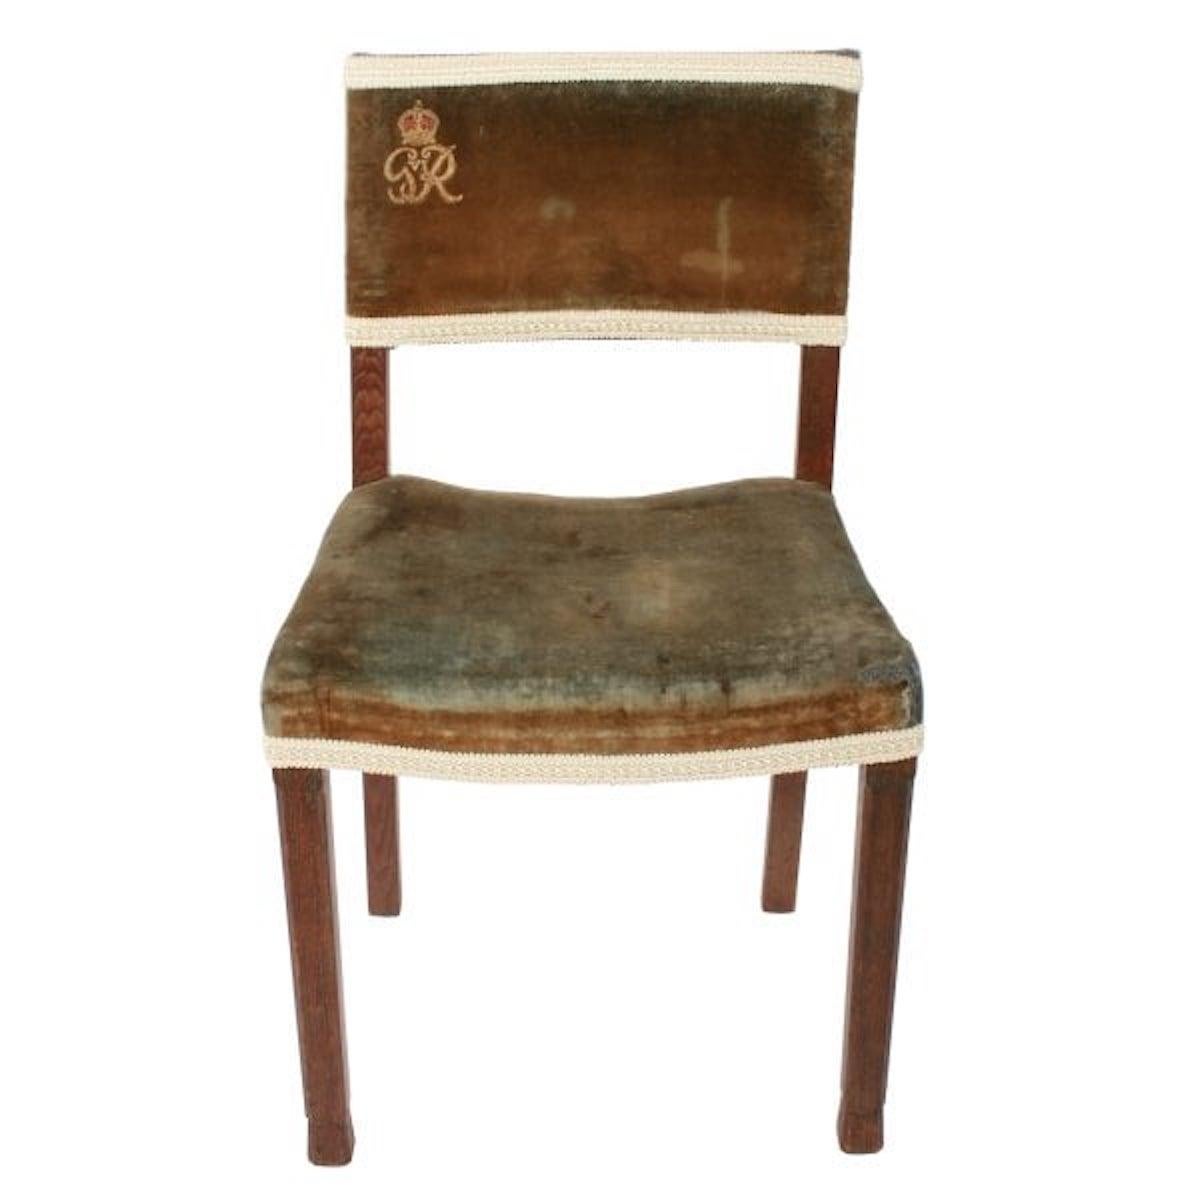 George VI oak coronation chair

A 20th century oak chair made for the coronation of George VI in 1937.

The chair was made by W Hands & Sons of High Wycombe Buckinghamshire and is stamped underneath with a crown, G R VI 1937 and the maker's